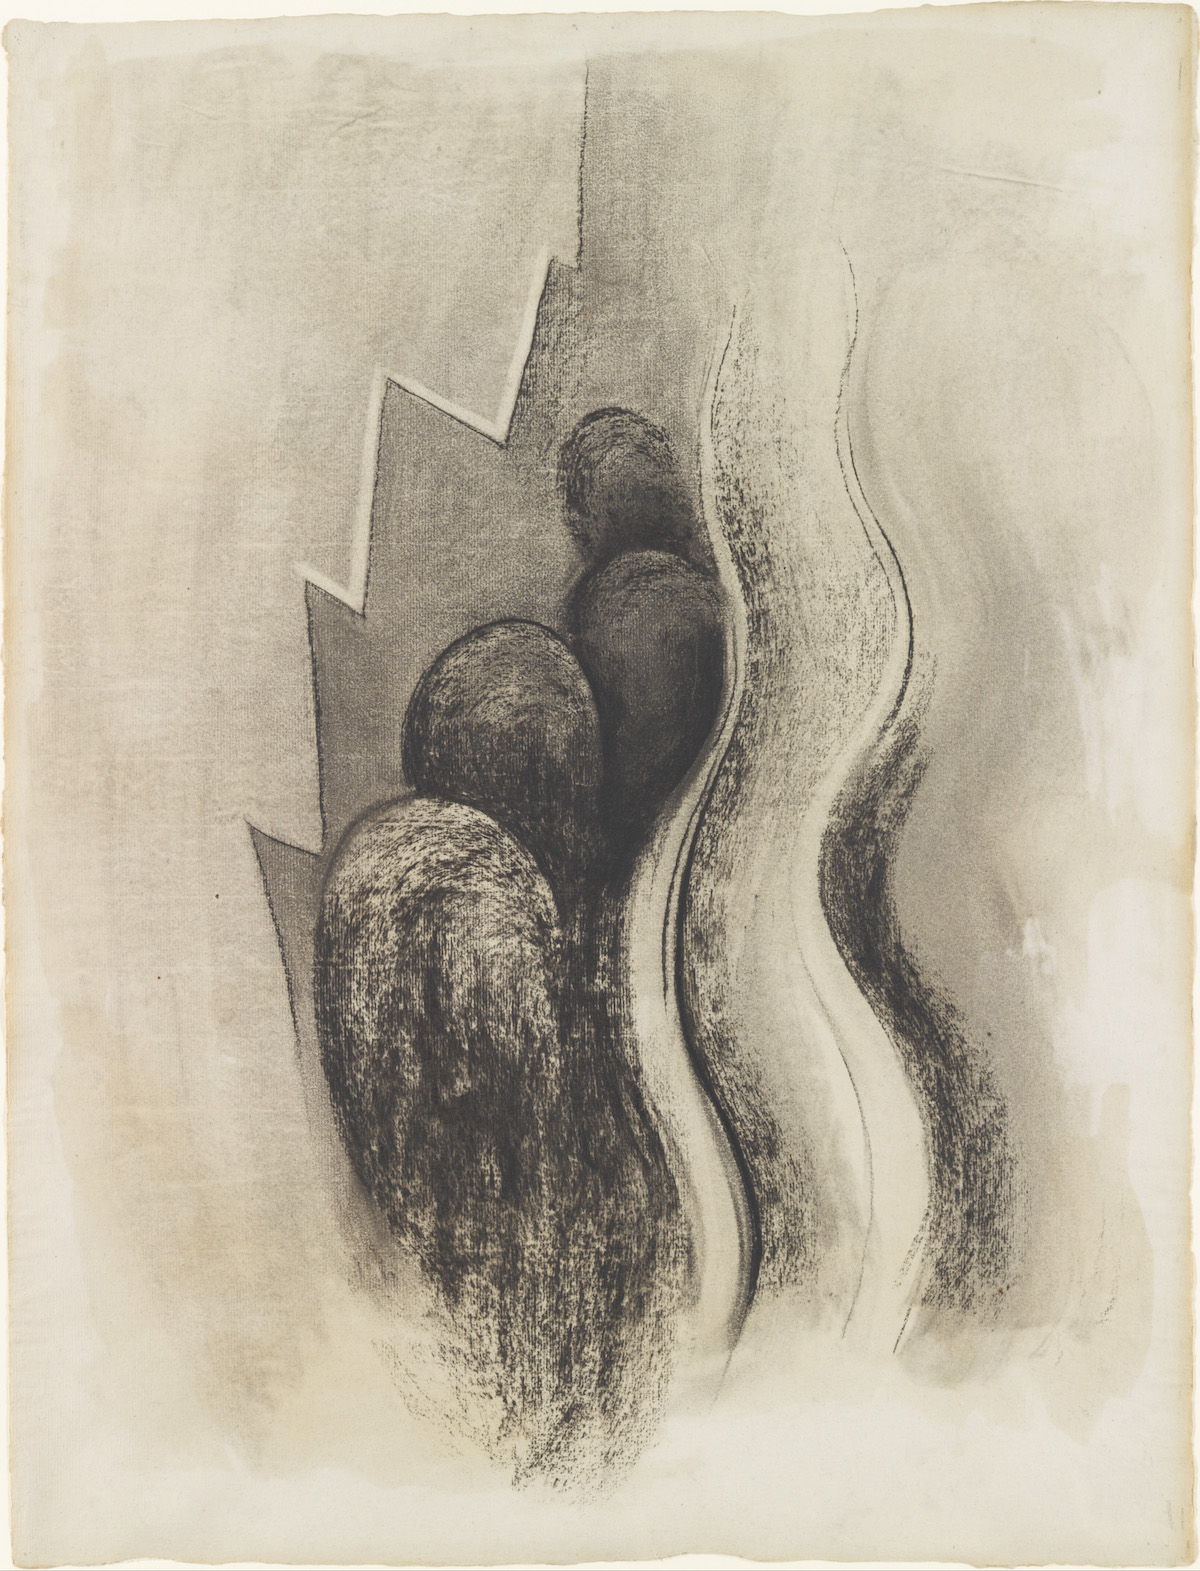 Charcoal drawing. Jagged forms, long, bulb-like shapes, and wavy lines are layered up along the center of this cream-white paper in this vertical drawing. A zig-zagging line to our left is filled in with solid medium gray to make a serrated form. Four tall, finger-like mounds clustered next to it, to our right, are darker, almost black. Some strokes of charcoal are visible, especially on the shape closest to us. Wavy lines create an outline for a form like a river to our right, which is shaded lightly but mostly white. The paper is smudged around the collection of forms.